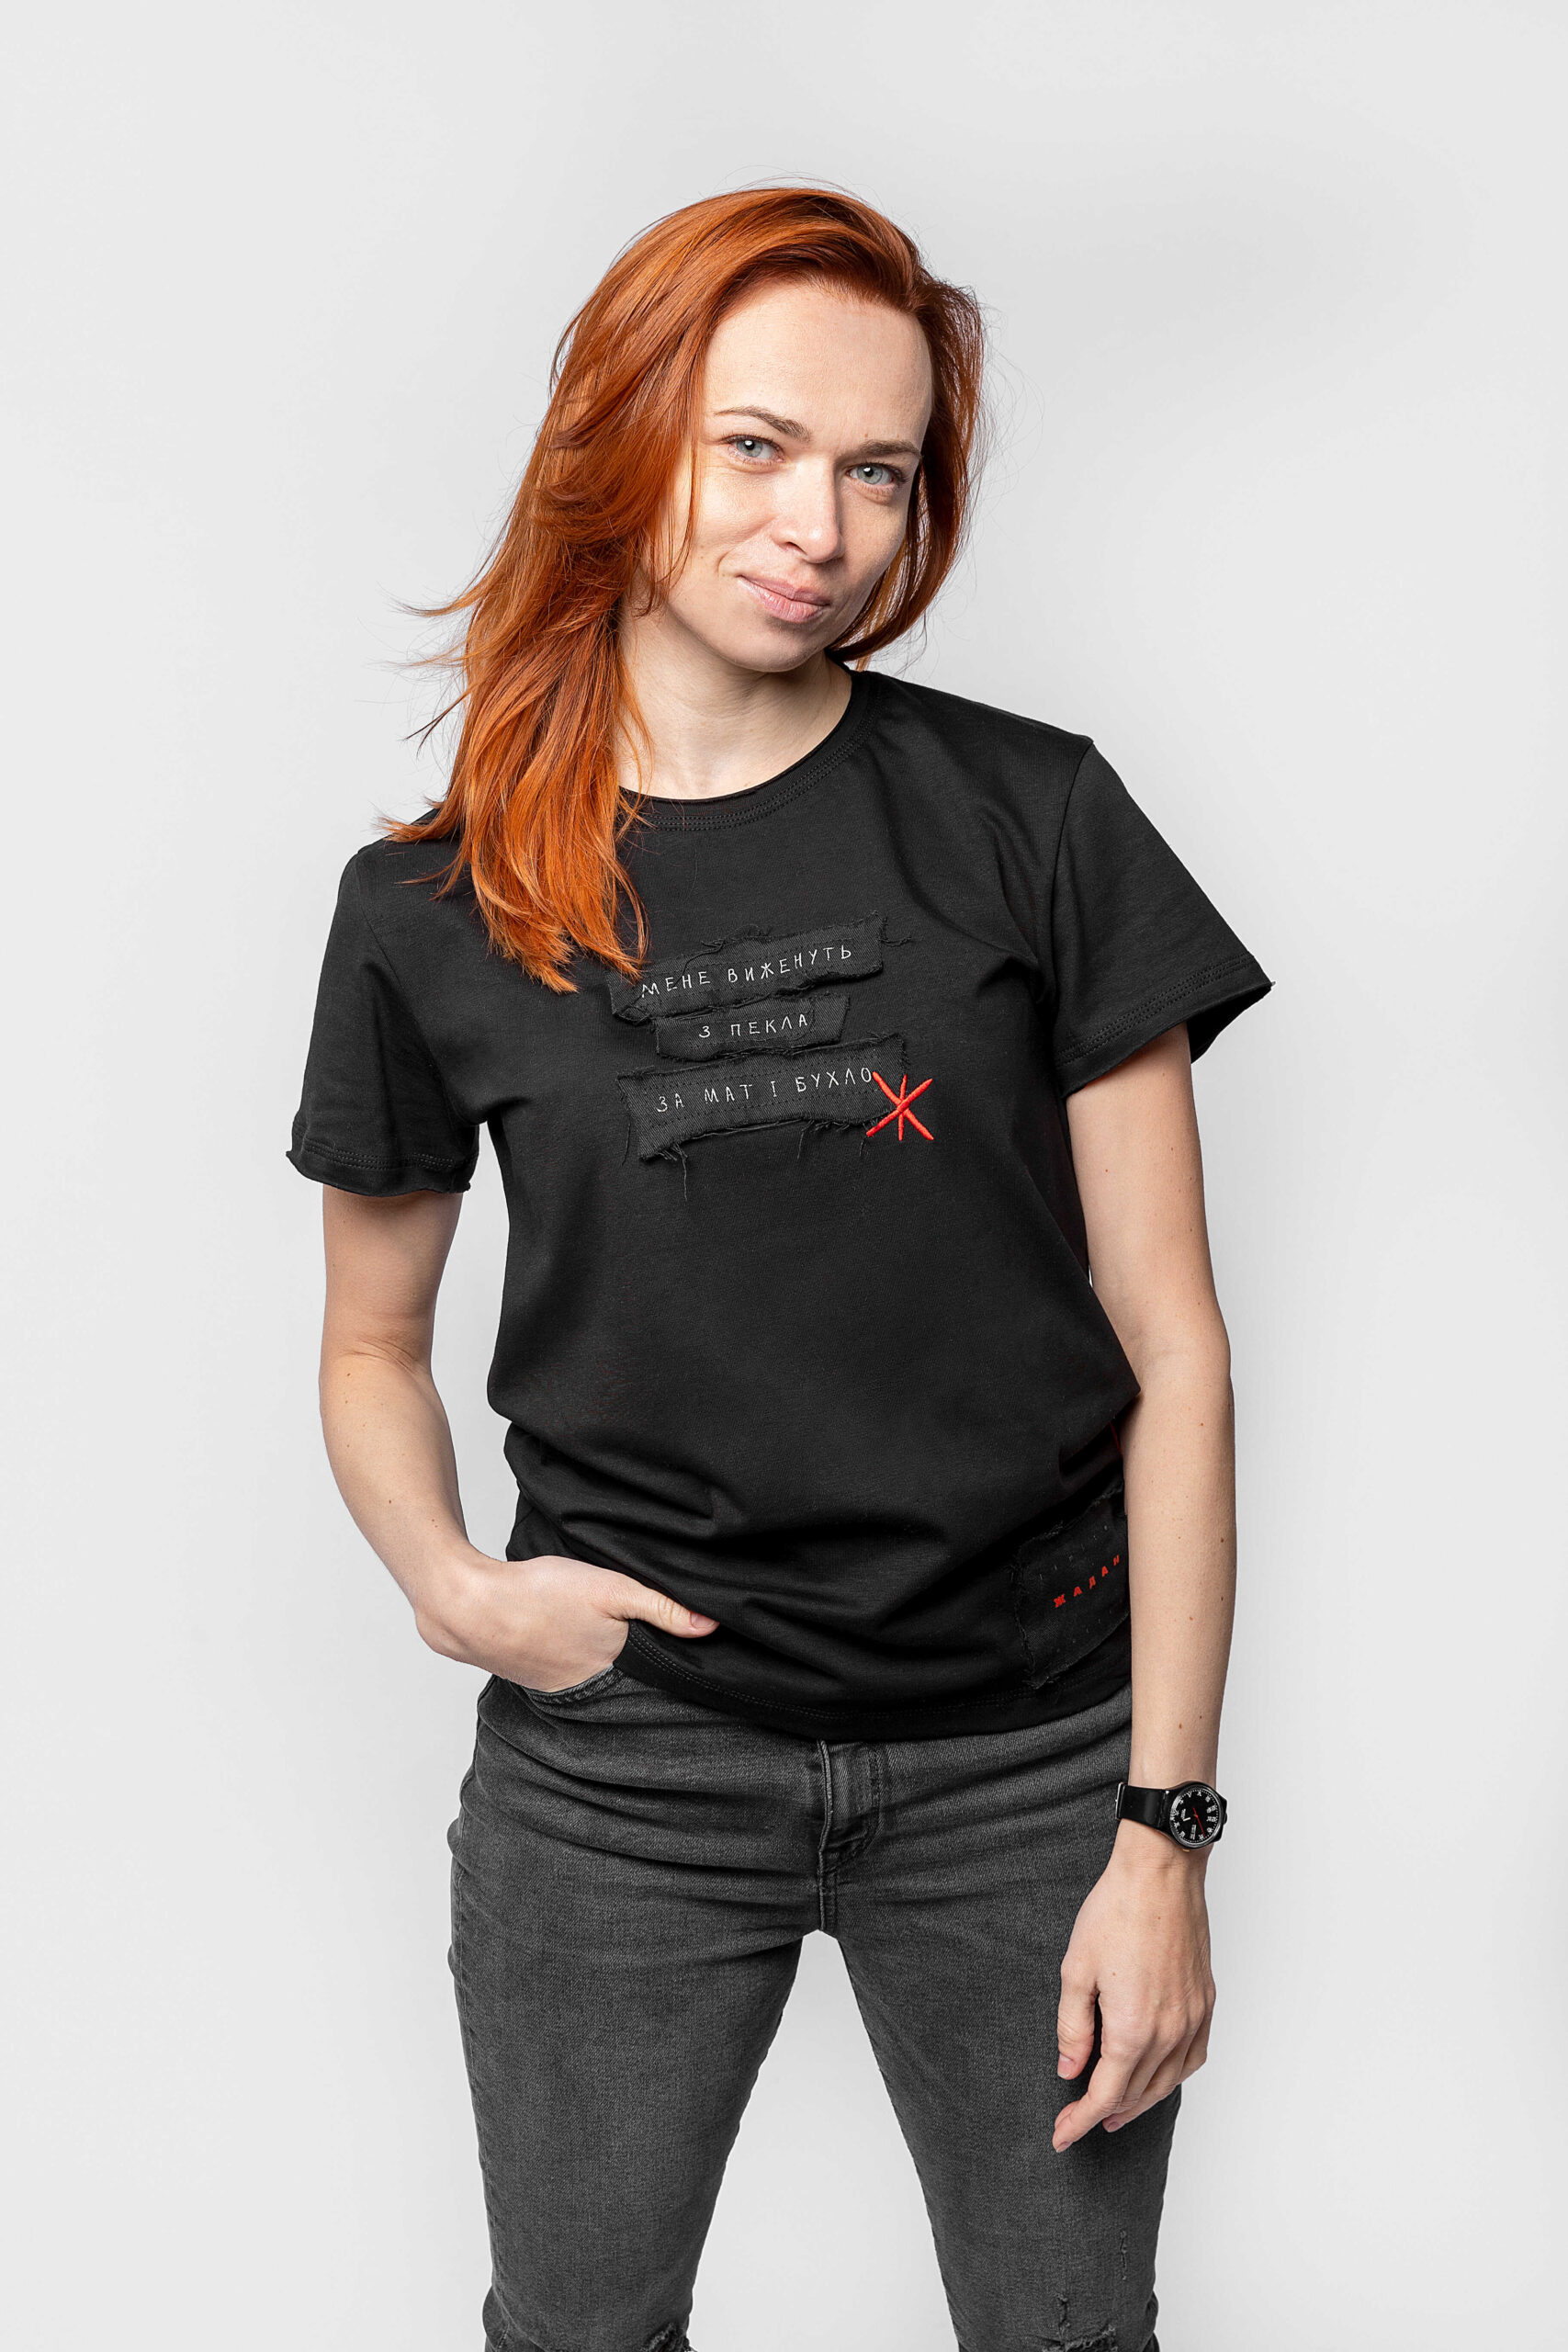 Women's T-Shirt Exiled From Hell. Color black. .